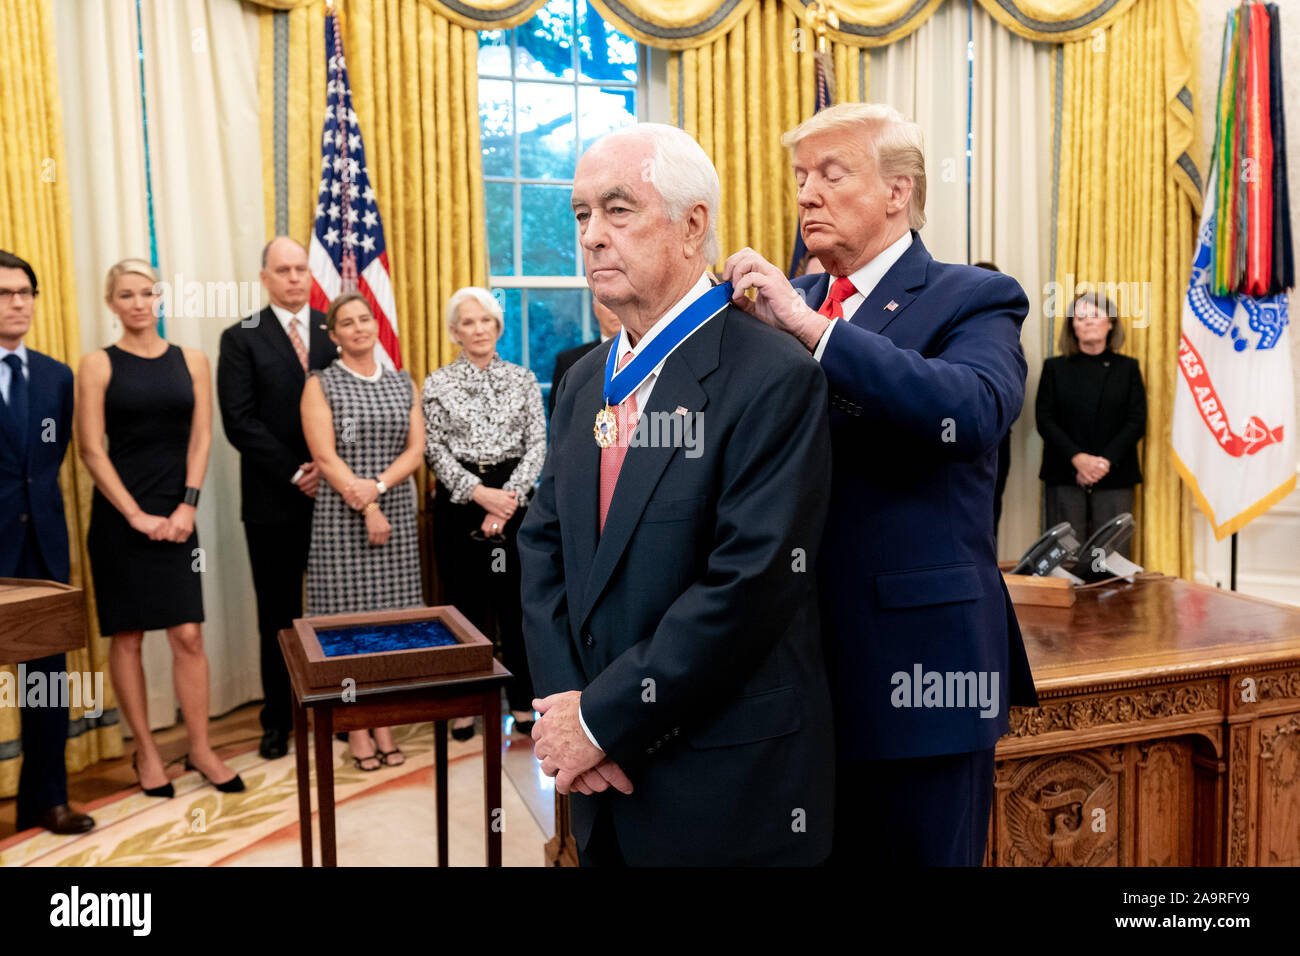 President Donald J. Trump presents the Presidential Medal of Freedom, the nation’s highest civilian honor, to legendary race car driver and race team owner Roger Penske, Thursday, Oct. 24, 2019, in the Oval Office of the White House. Stock Photo